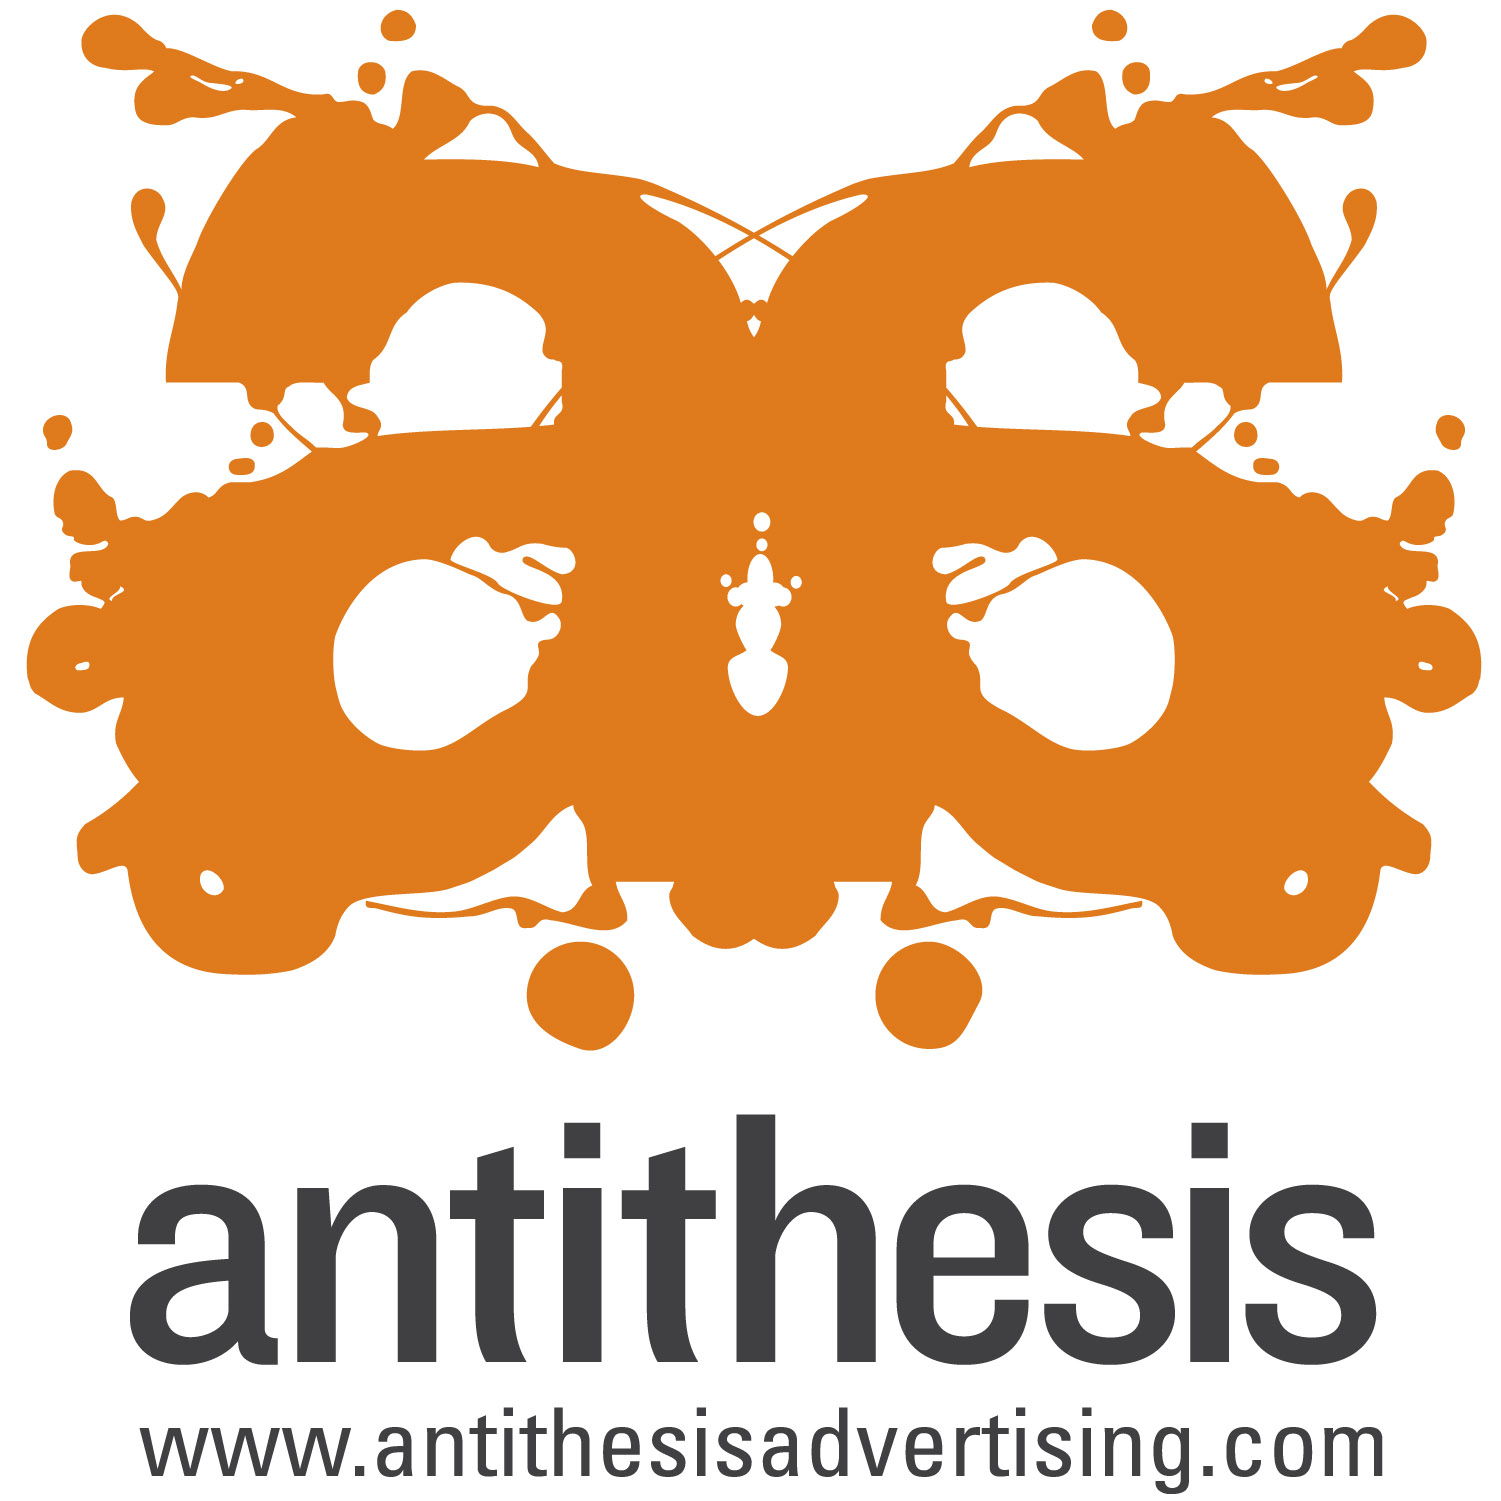 examples of antithesis in advertising